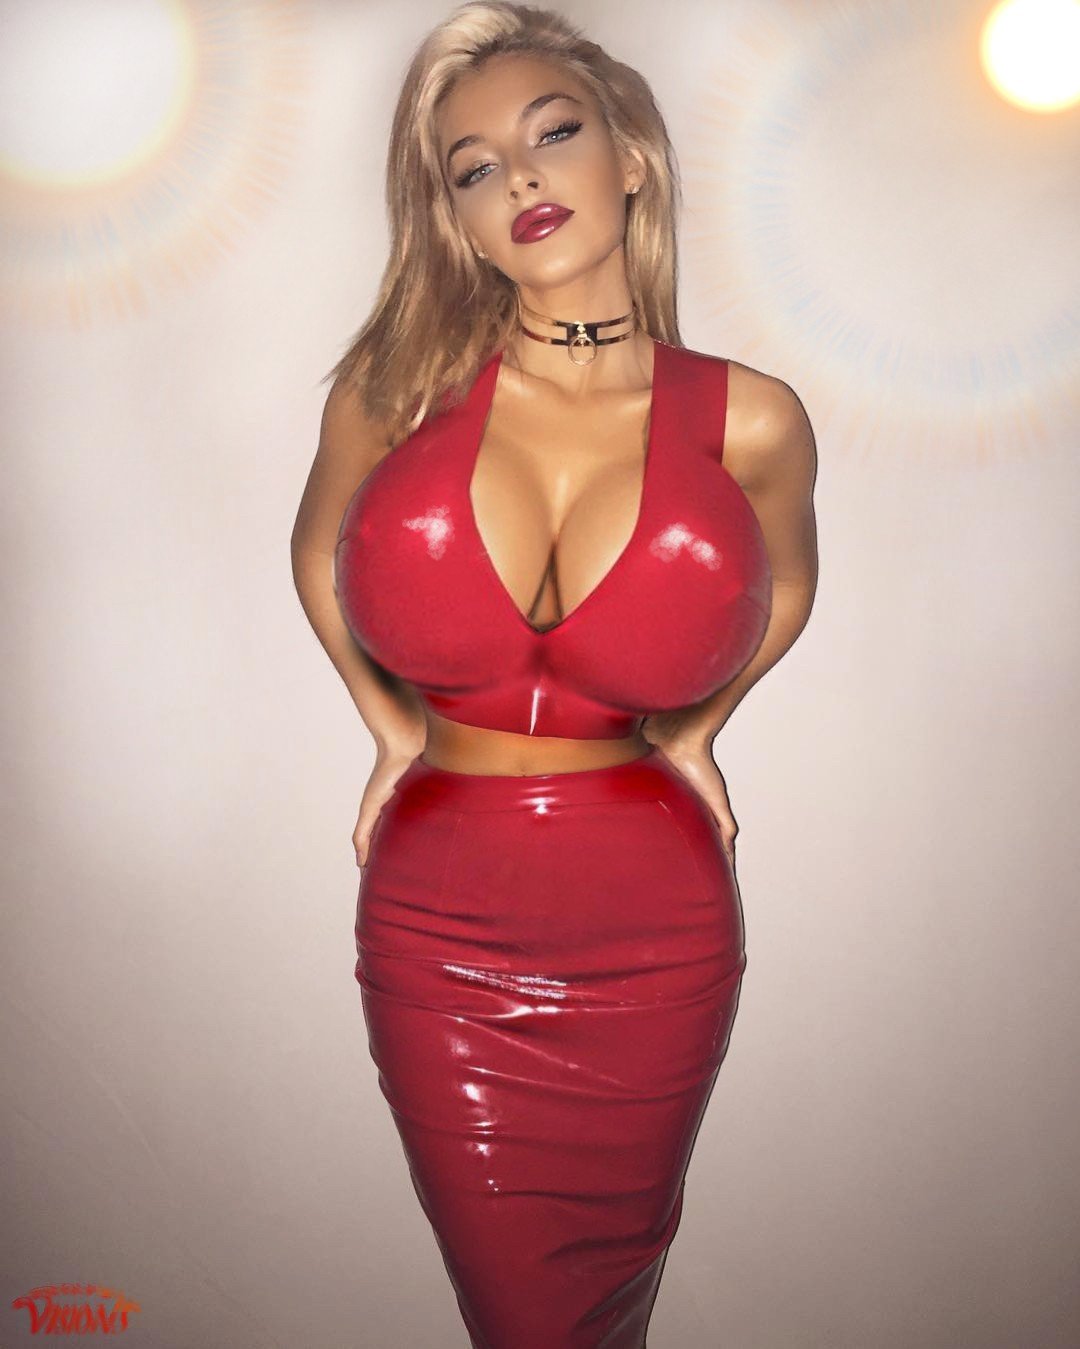 Photo by houblive1950 with the username @houblive1950,  February 12, 2019 at 6:57 PM and the text says 'via  Gridllr.com   —  4000 Likes, no problem! #❤️  #Make-up  #choker  #that  #kissable  #delicious  #red  #lip  #among  #everything  #else  #she  #has  #going  #neck  #down'